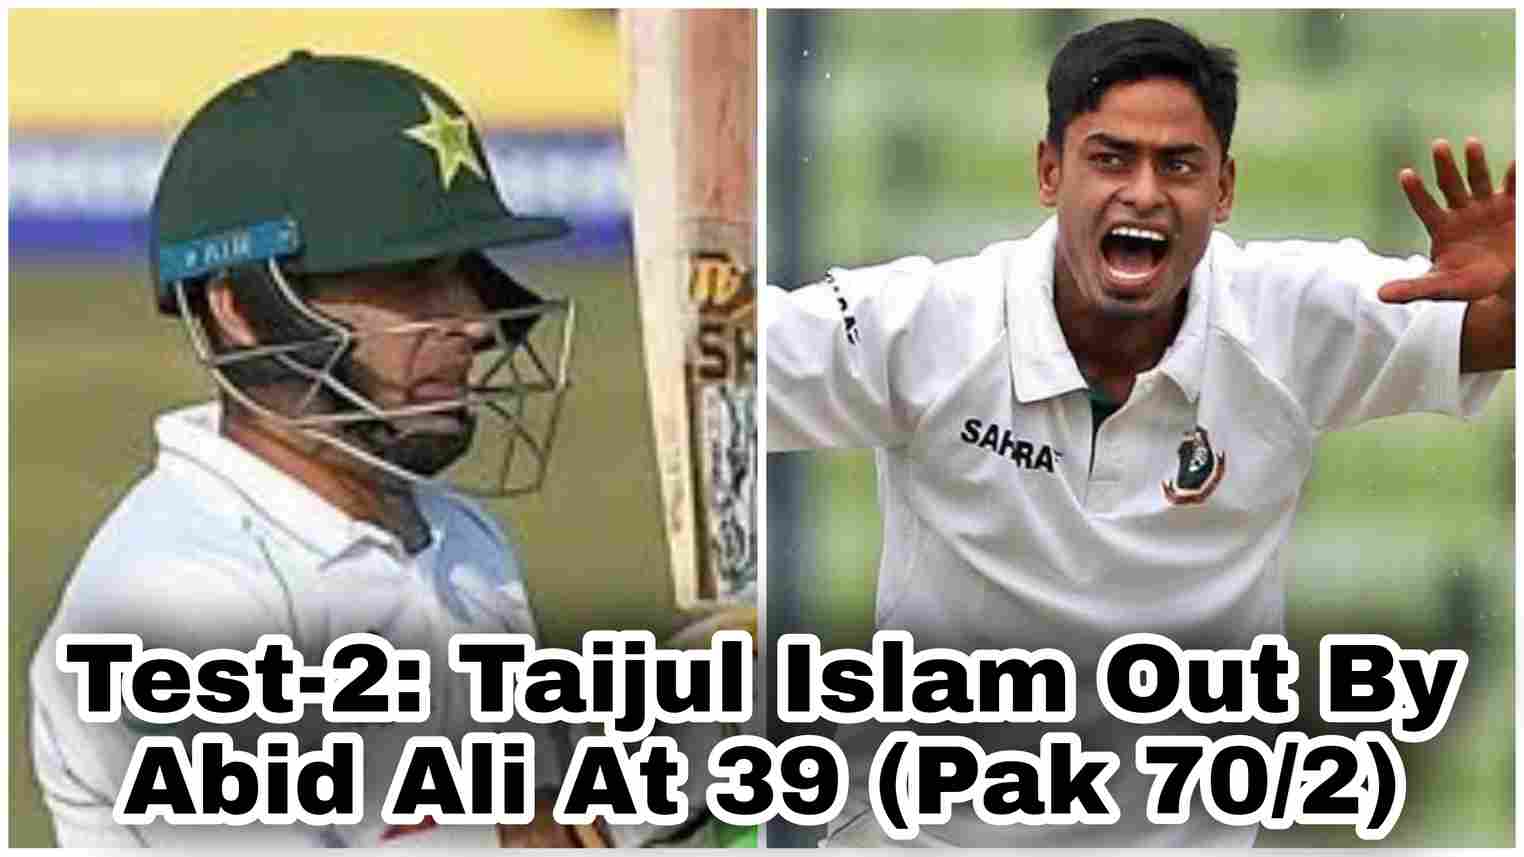 Test-2: Taijul Islam Out By Abid Ali At 39 (Pak 70/2)  Taijul Islam to Abid Ali, OUT! CHOPPED ON! Both the openers are gone and Taijul Islam has struck again! Flatter ball, around off.  Abid Ali goes back to cut it but there is not much room for him to free his arms.  He ends up getting the bottom edge back on the off pole and Taijul Islam is delighted with that wicket.  The two overs before this were maiden and the pressure was building up.  Good bowling by the hosts.